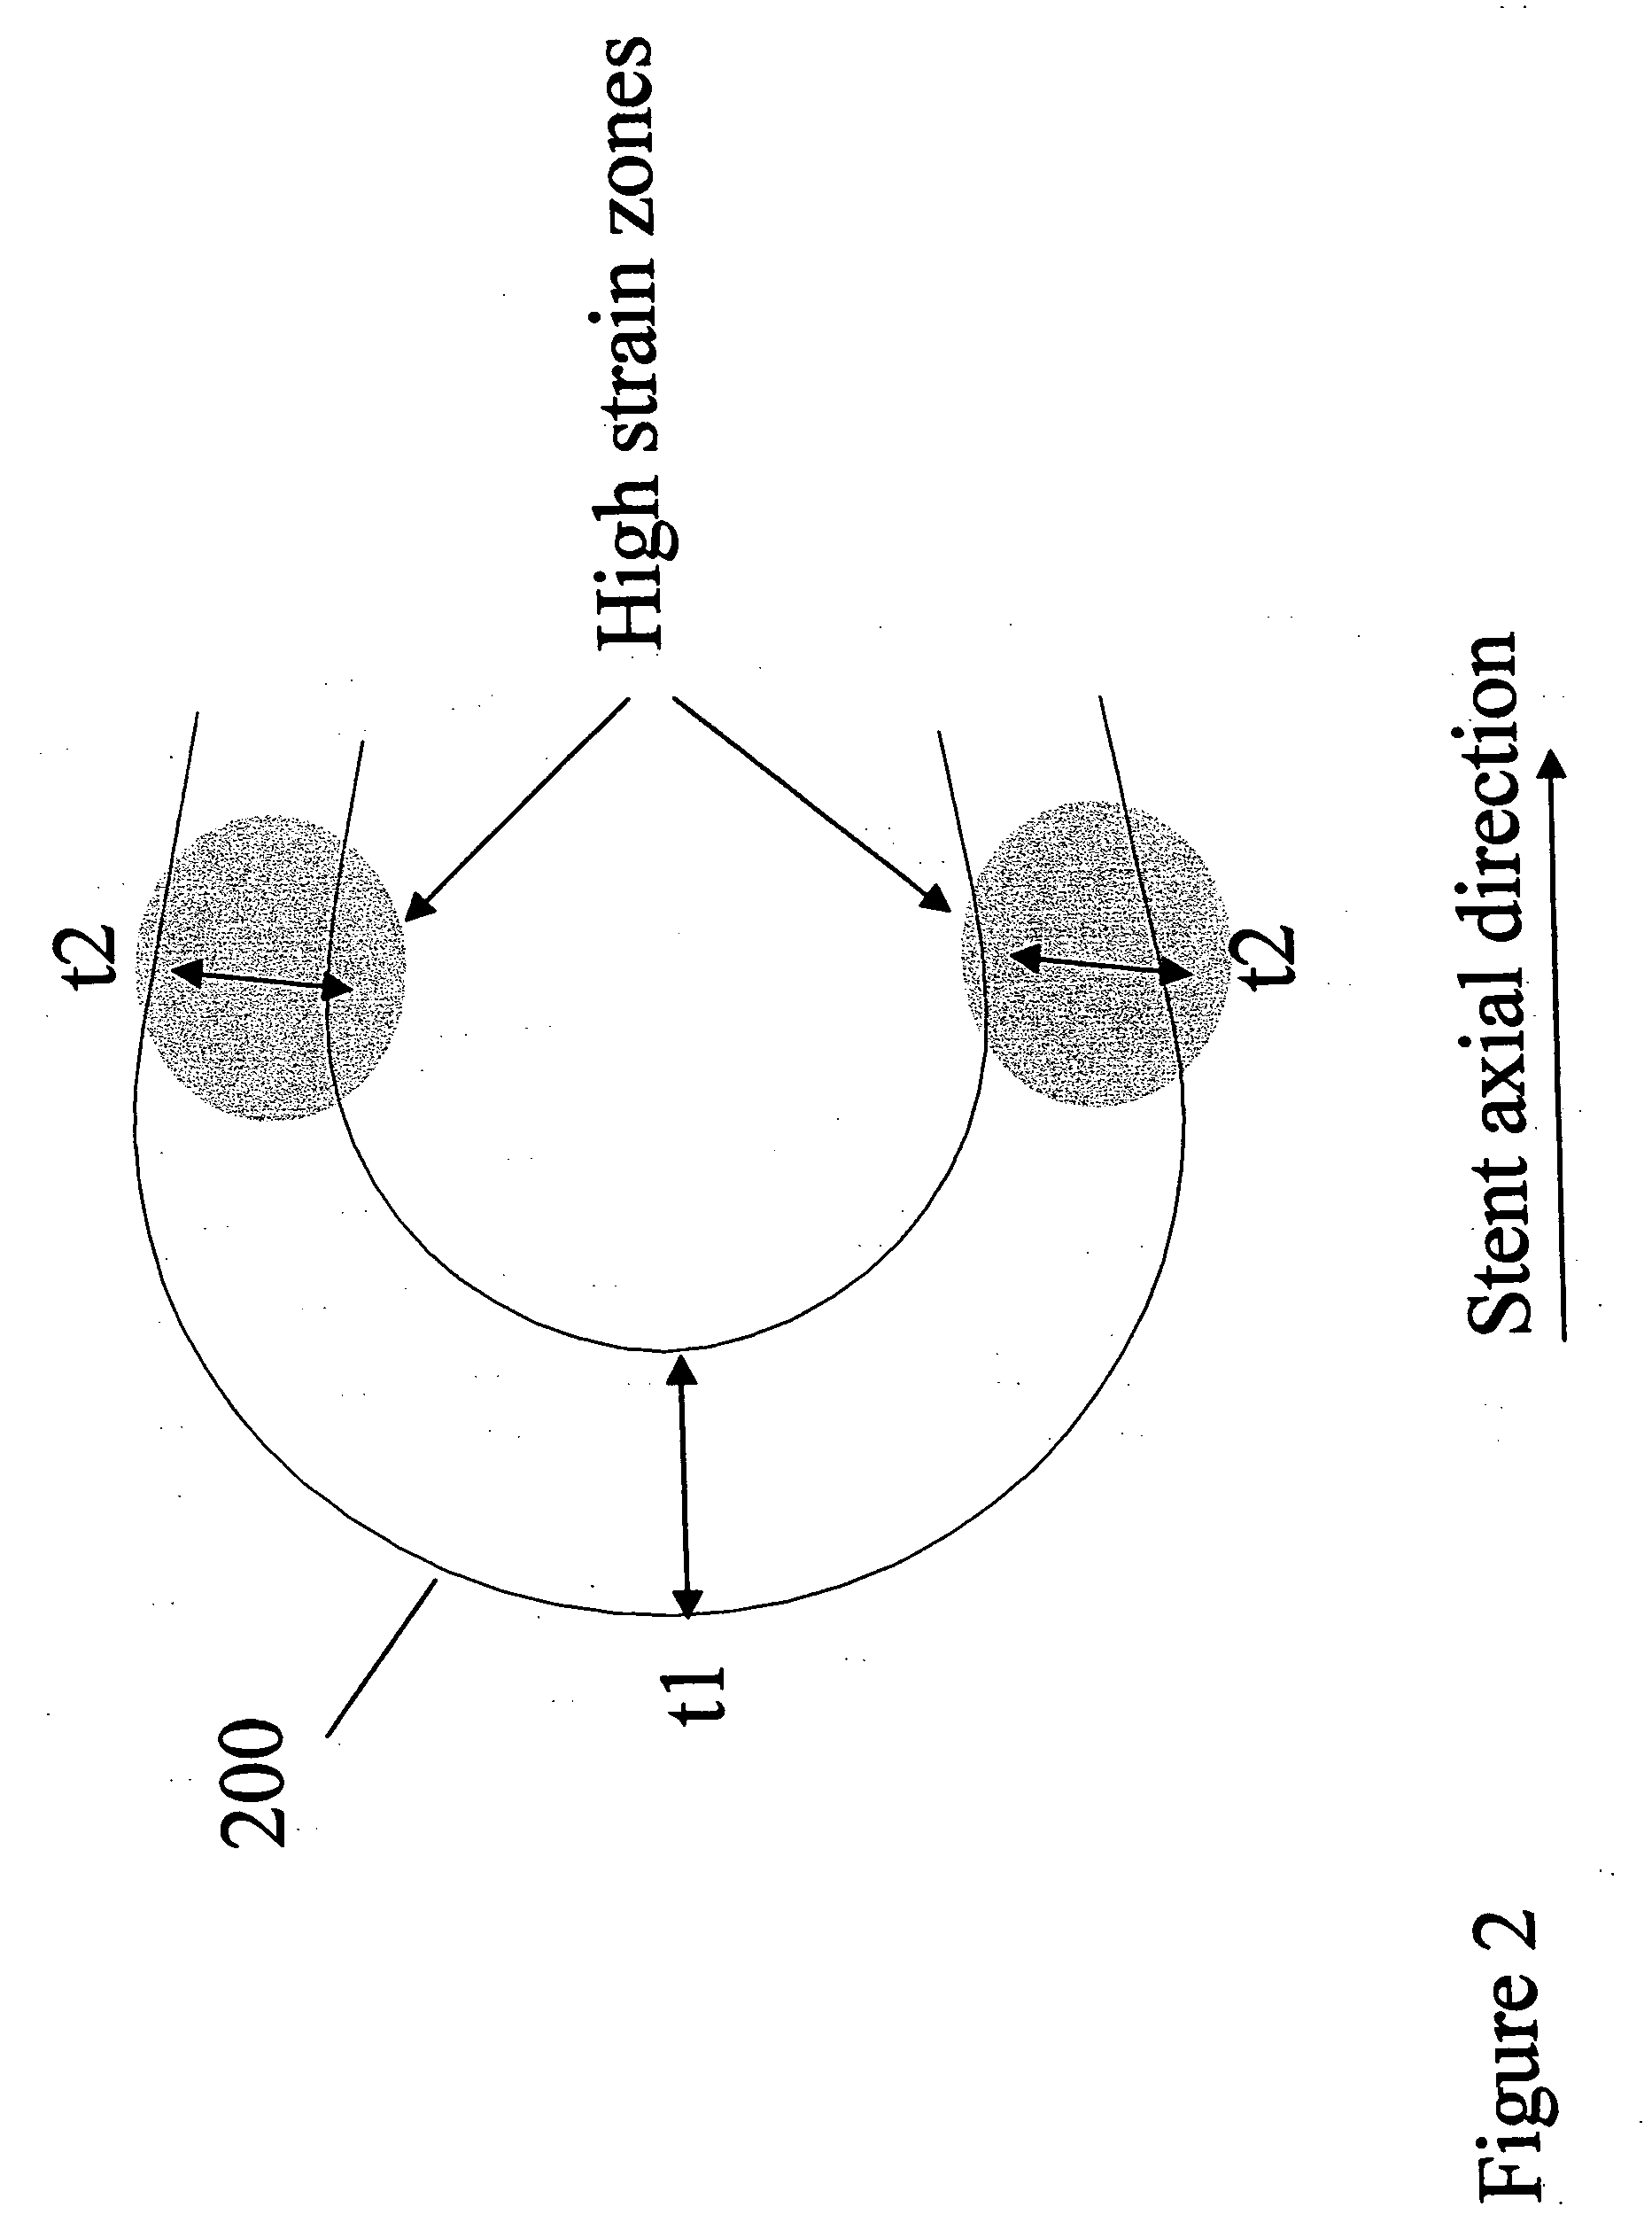 Polymeric stent having modified molecular structures in selected regions of the hoops